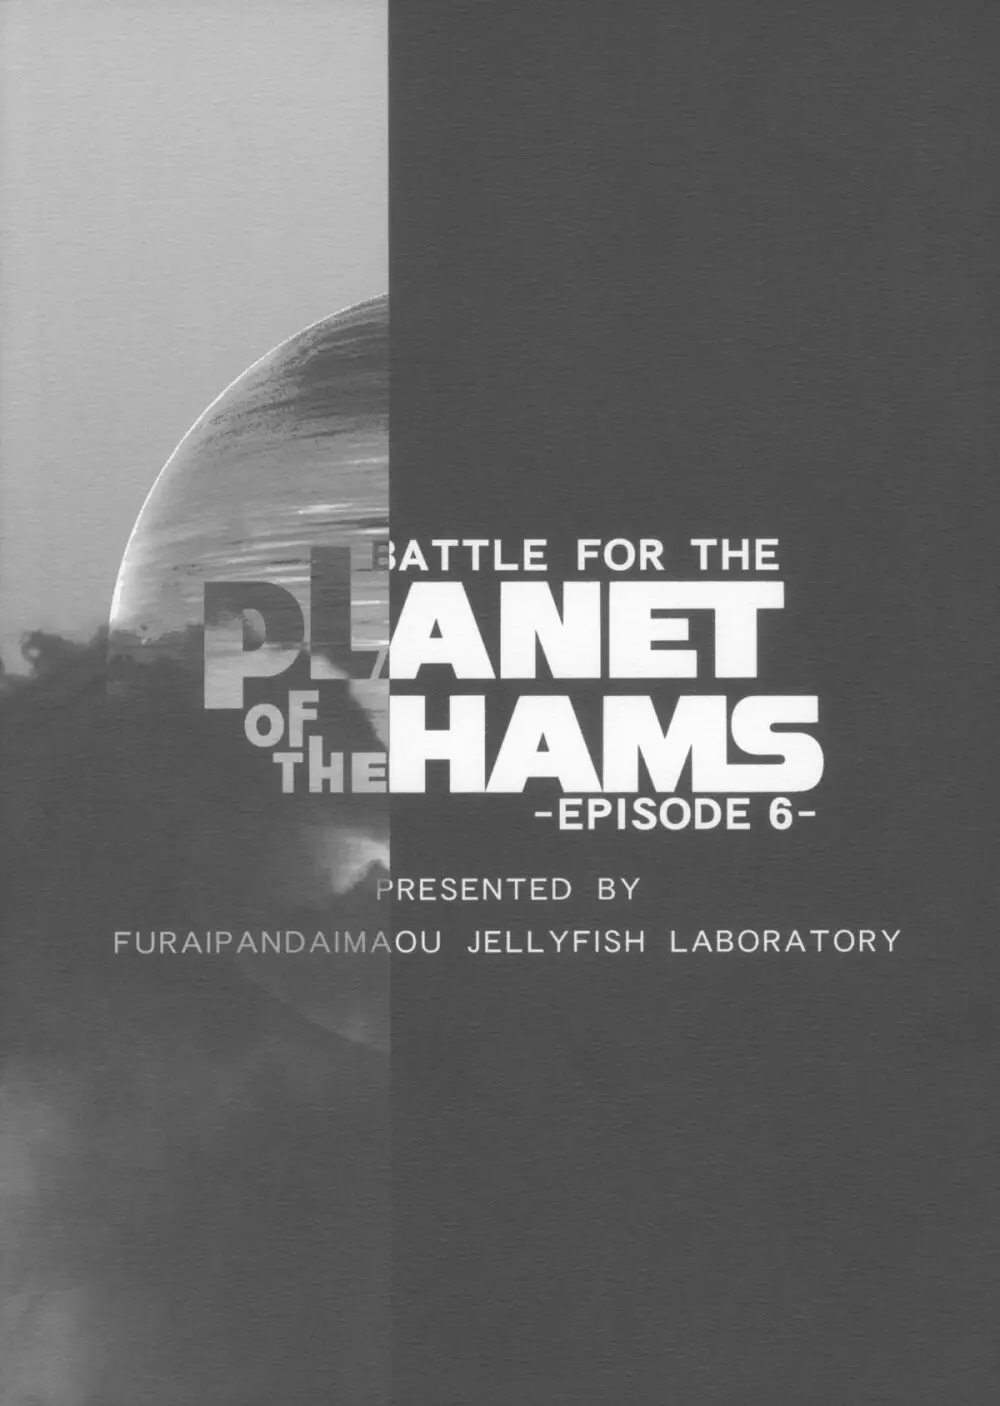 BATTLE FOR THE PLANET OF THE HAMS -EPISODE 6- 2ページ